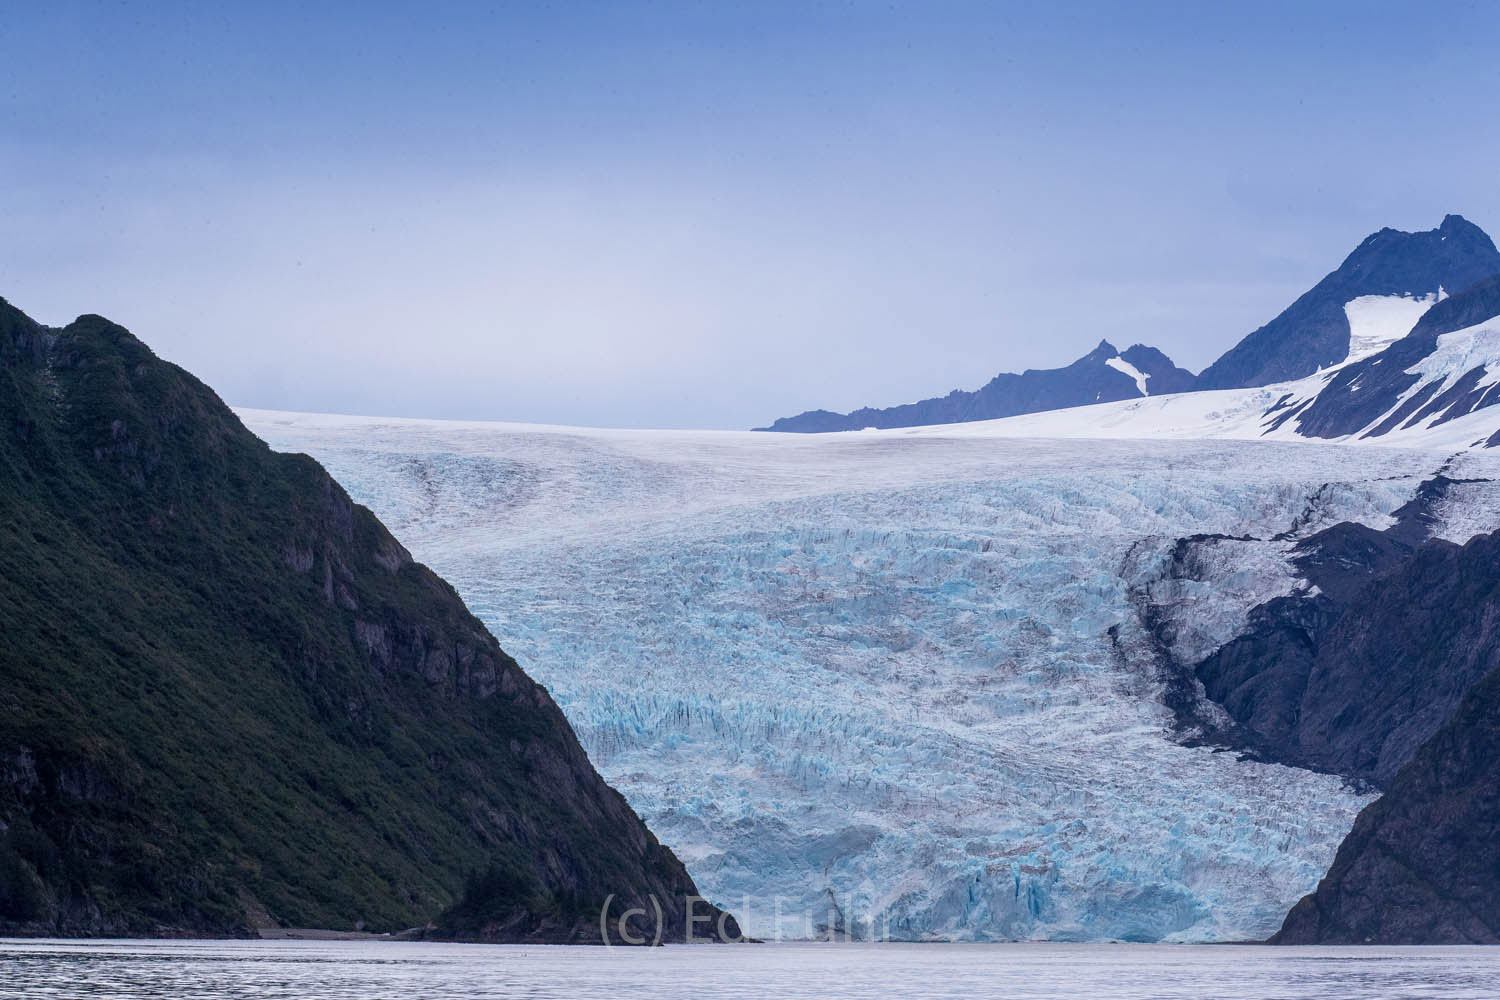 Holgate Glacier advances from the Harding Icefield to Aialik Bay.  It is one of the few glaciers actually growing in size.